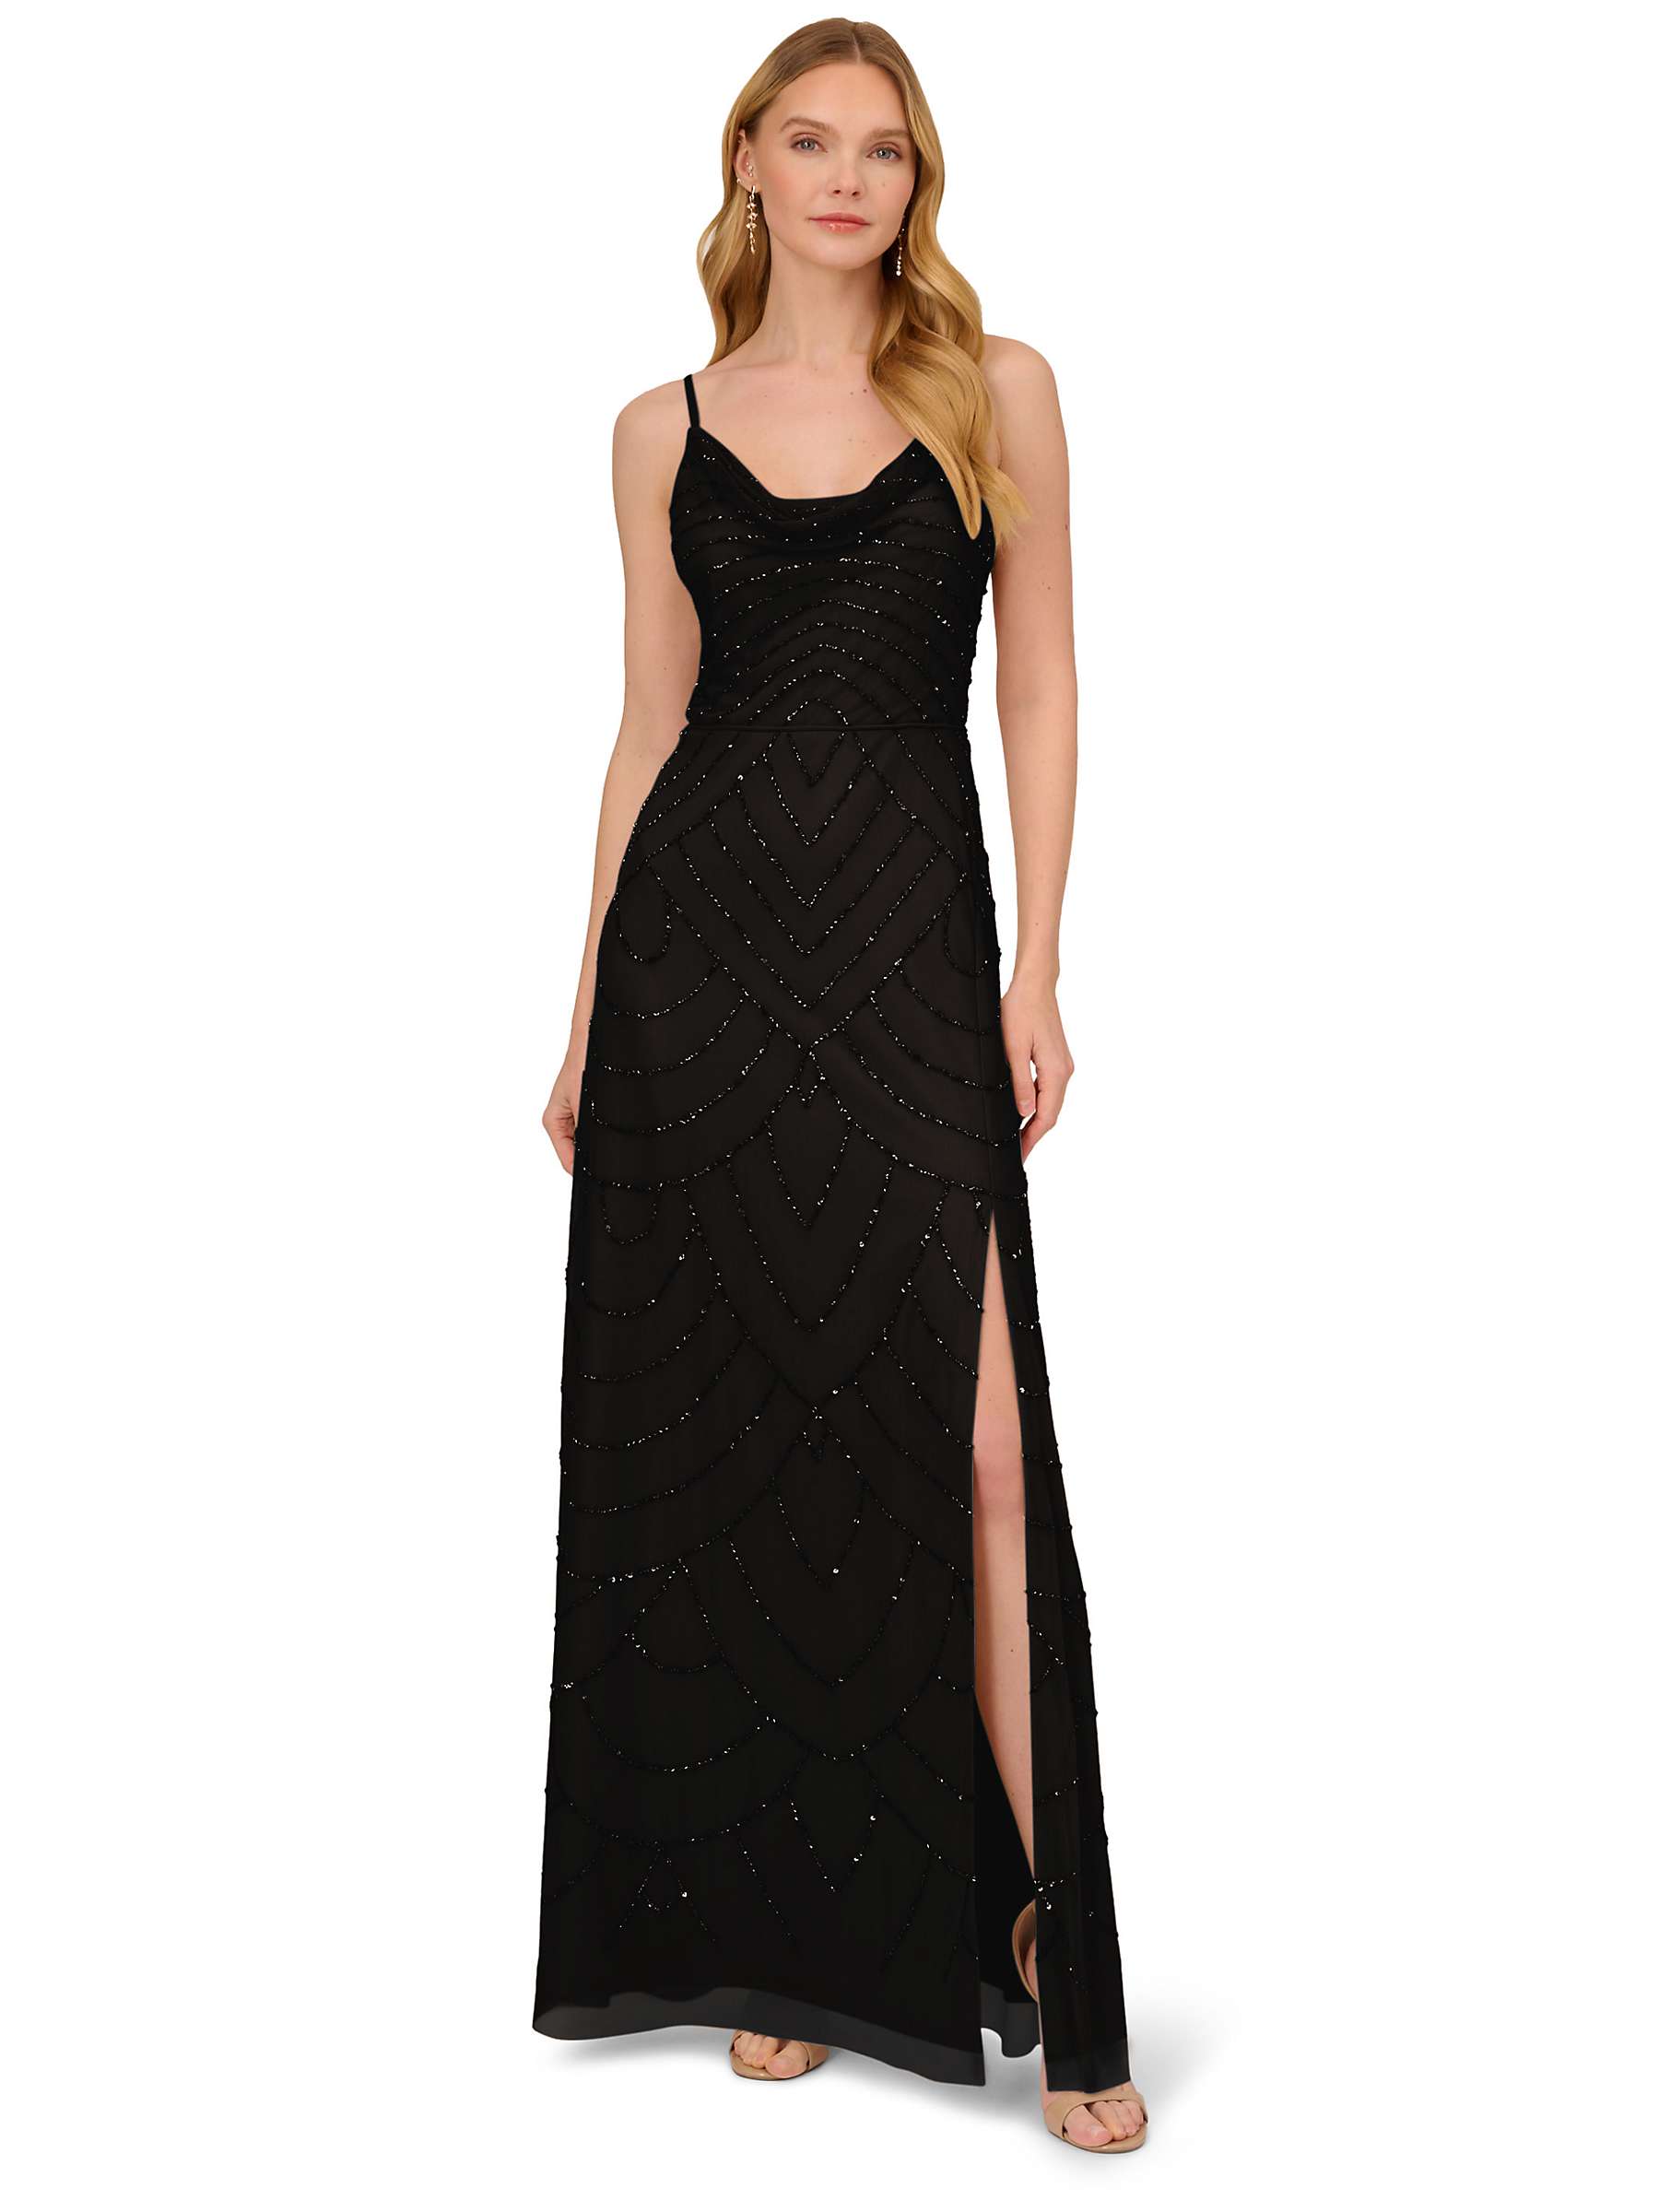 Buy Adrianna Papell Beaded Cowl Deco Gown Dress, Black Online at johnlewis.com